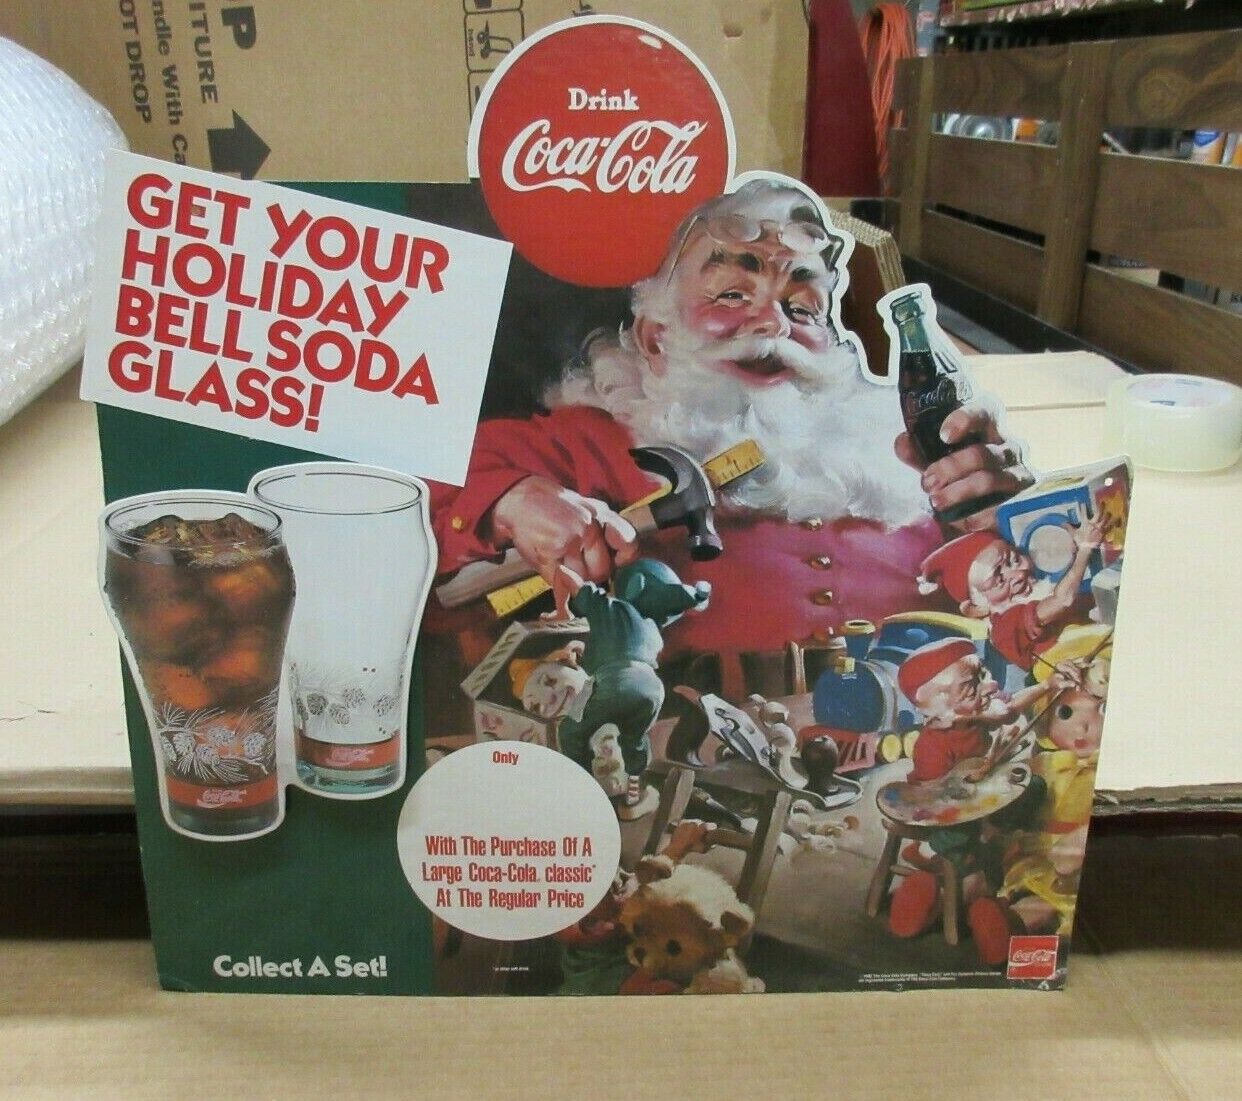 Vintage Drink Coca Cola Holiday bell soda glass double sided Cardboard Sign